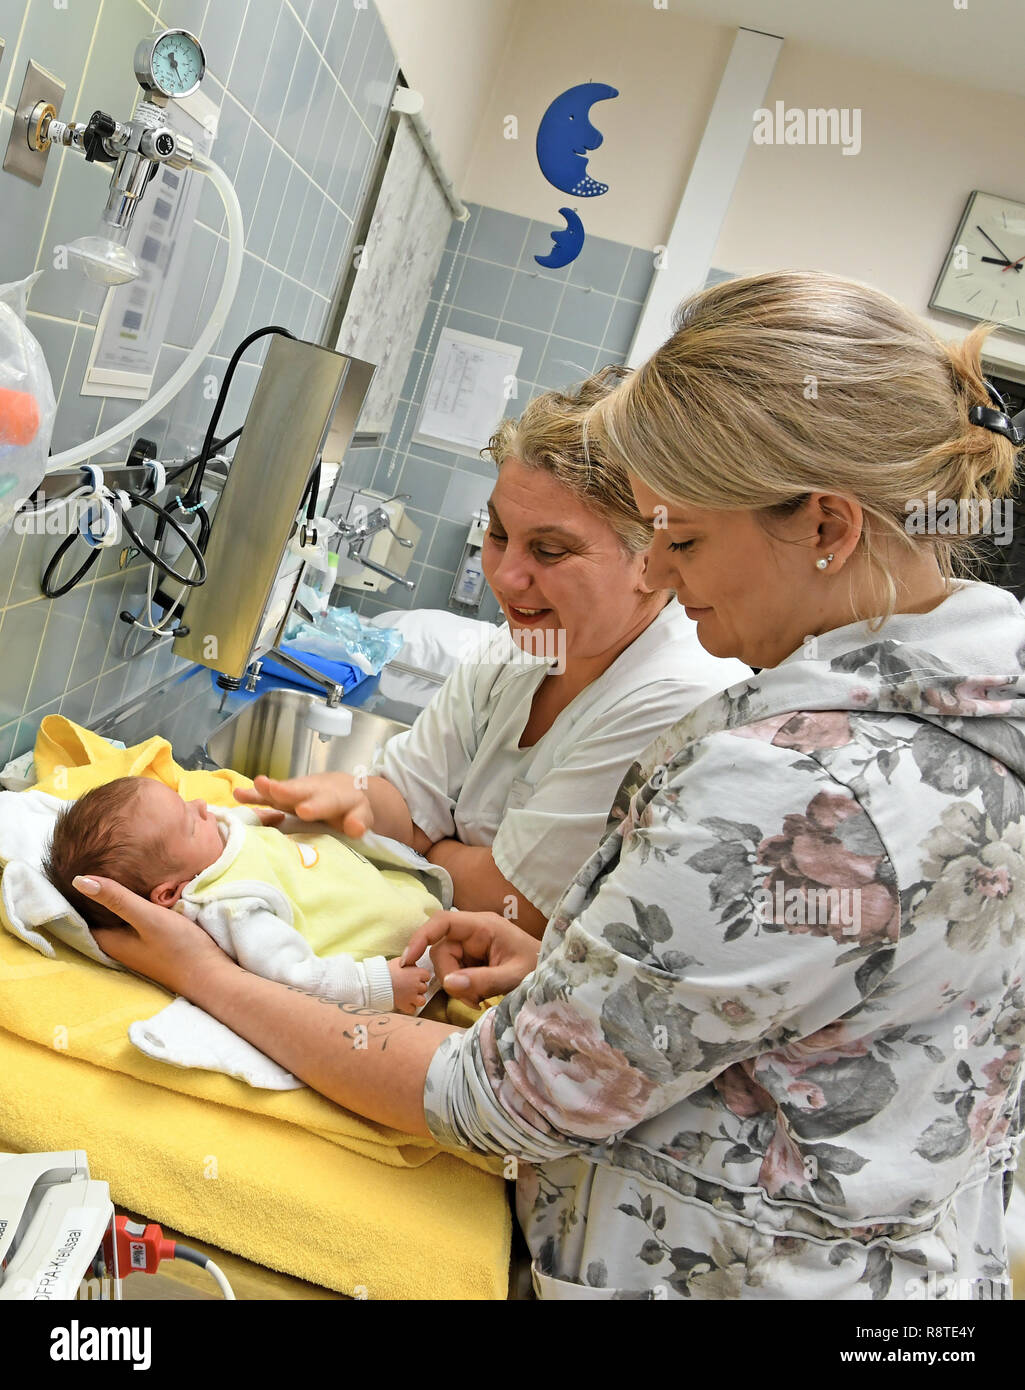 14 December 2018, Lower Saxony, Neustadt am Rübenberge: The five-day young twin girl Ella is cared for by her mother, Mrs. New Year (r), and by midwife Zinovia Aramidou (l) at the Neustadt am Rübenberge Clinic in the Clinic for Gynaecology and Obstetrics. Many maternity clinics in Lower Saxony are under massive pressure because midwives and nursing staff are missing. There are currently six vacancies for midwives in the three maternity clinics of the Klinikum Region Hannover (KRH) in Neustadt am Rübenberge, Gehrden and Großburgwedel. (on dpa 'Lack of midwives threatens the existence of materni Stock Photo